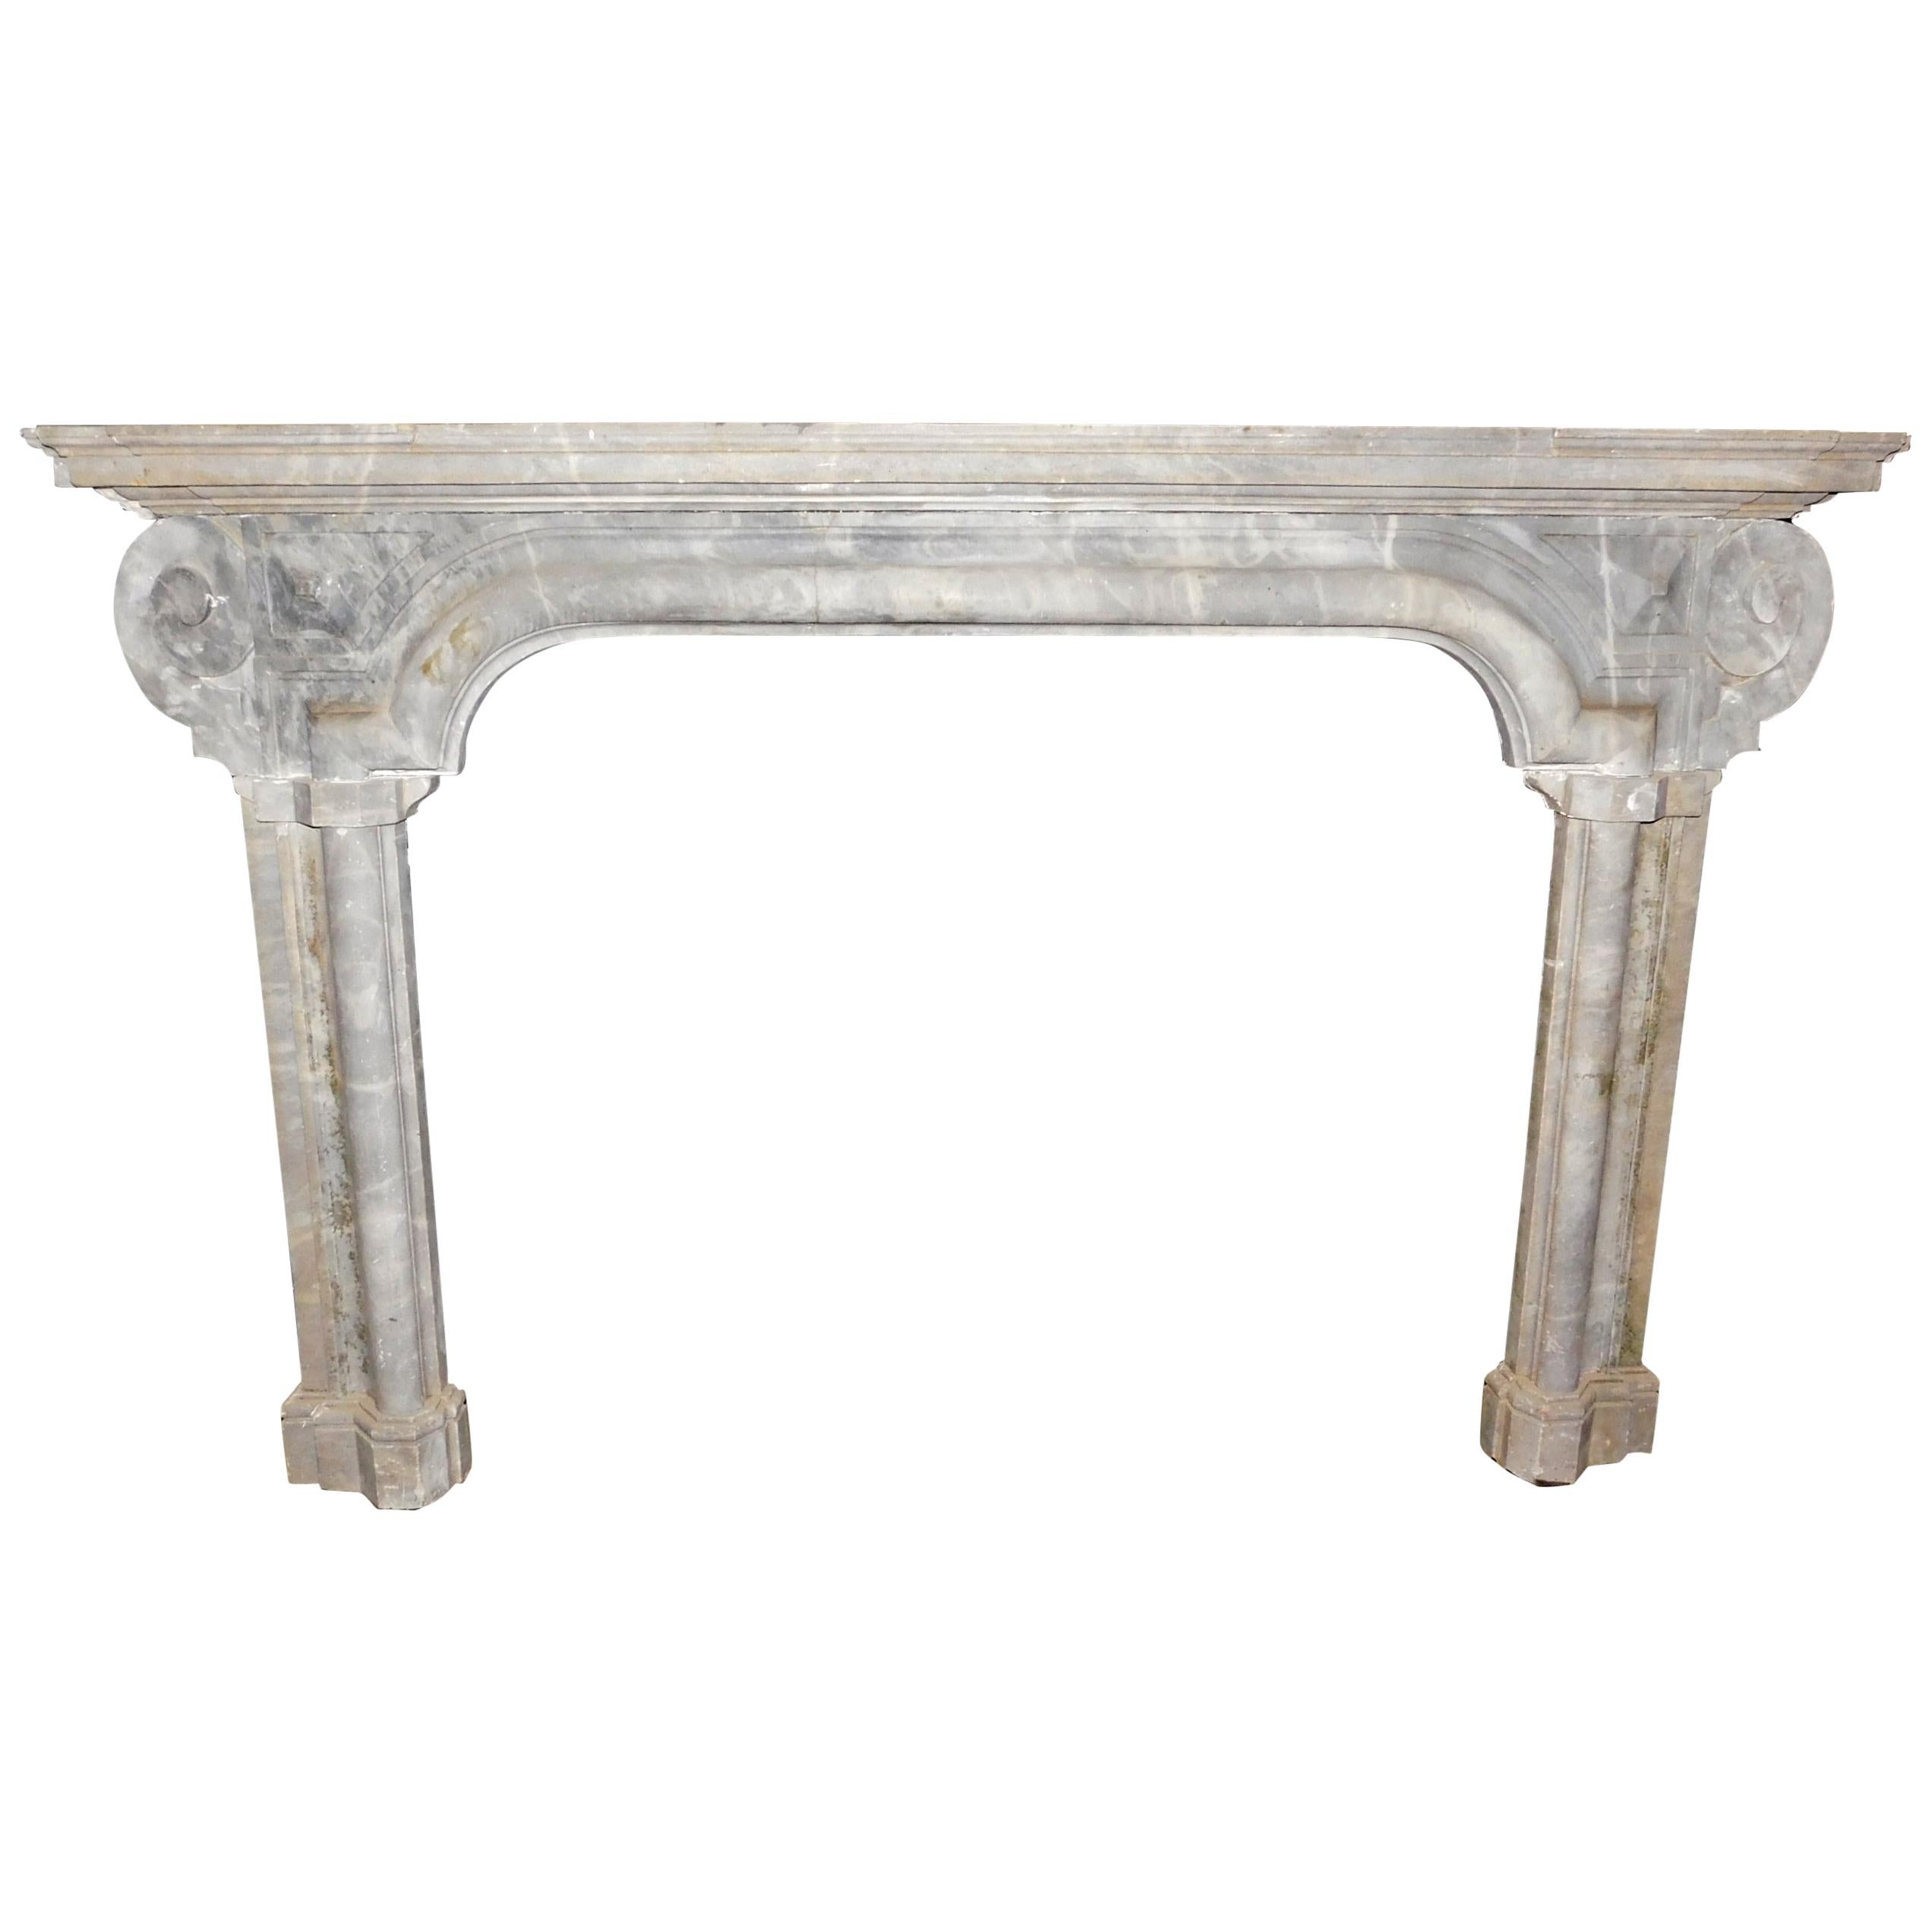 Antique Bardiglio Gray Marble Fireplace, 18th Century Italy For Sale